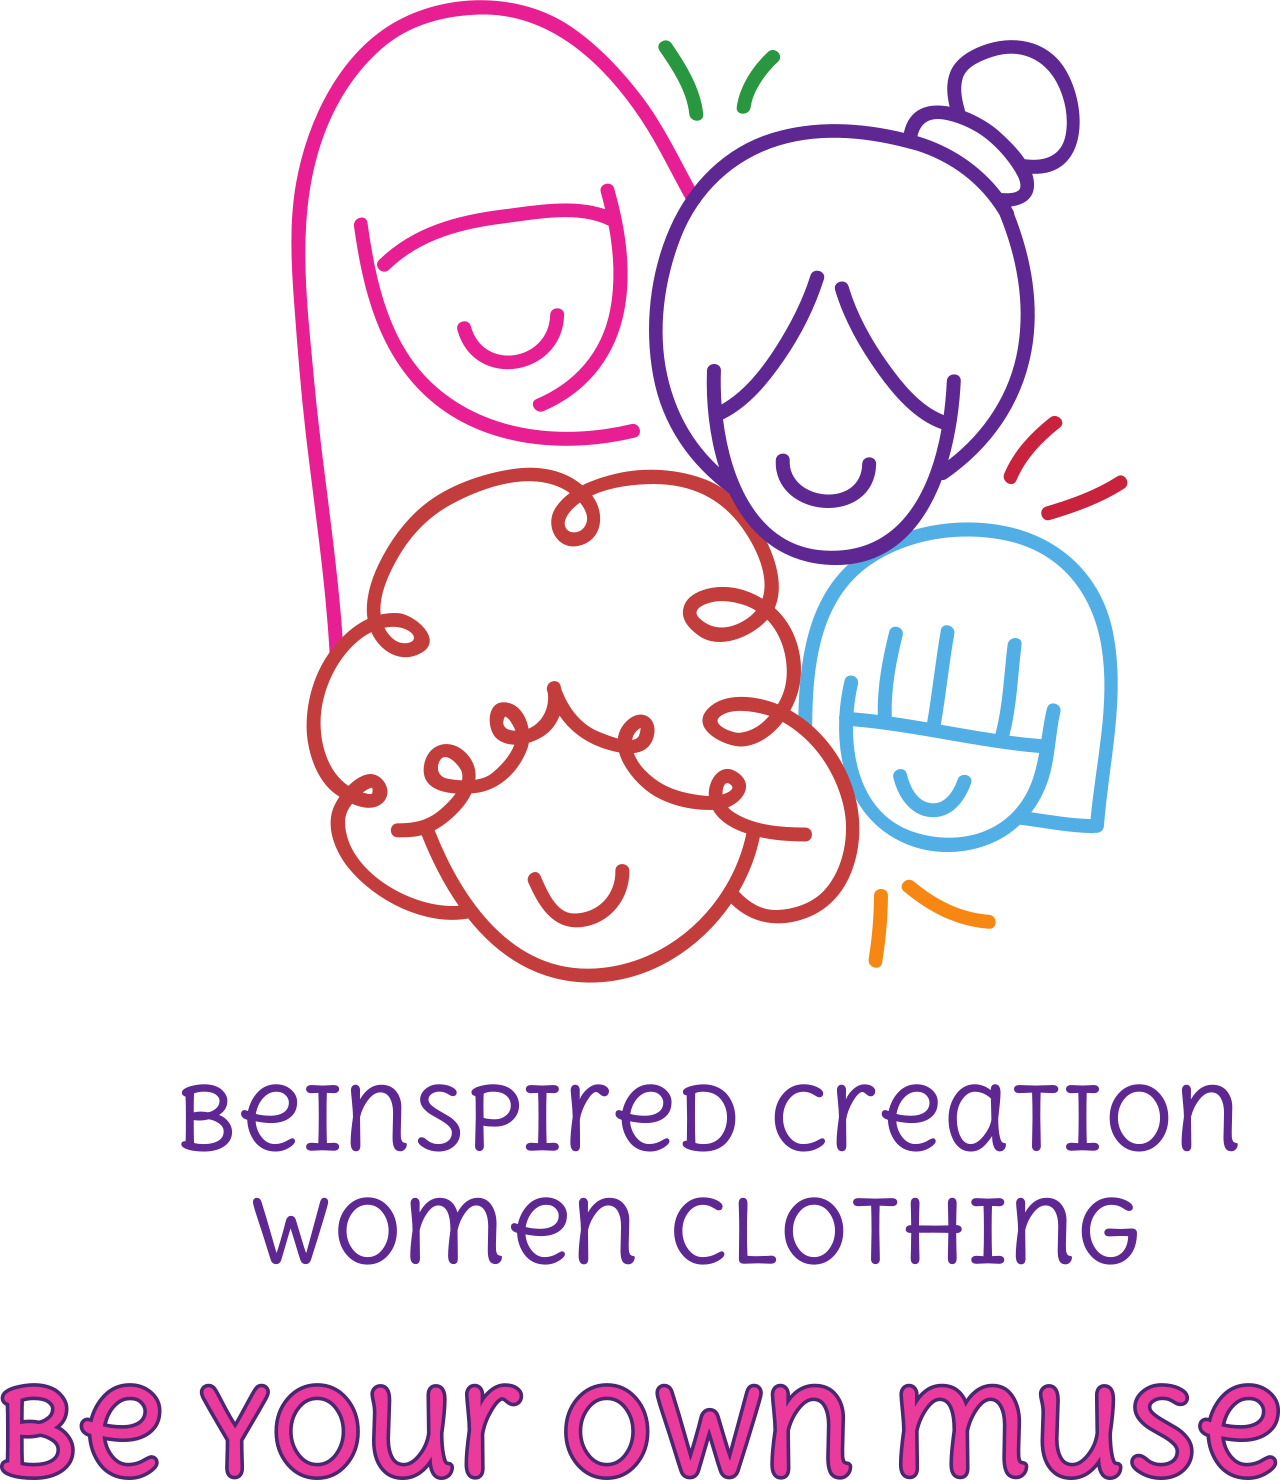 Beinspired creation
women clothing 's web page